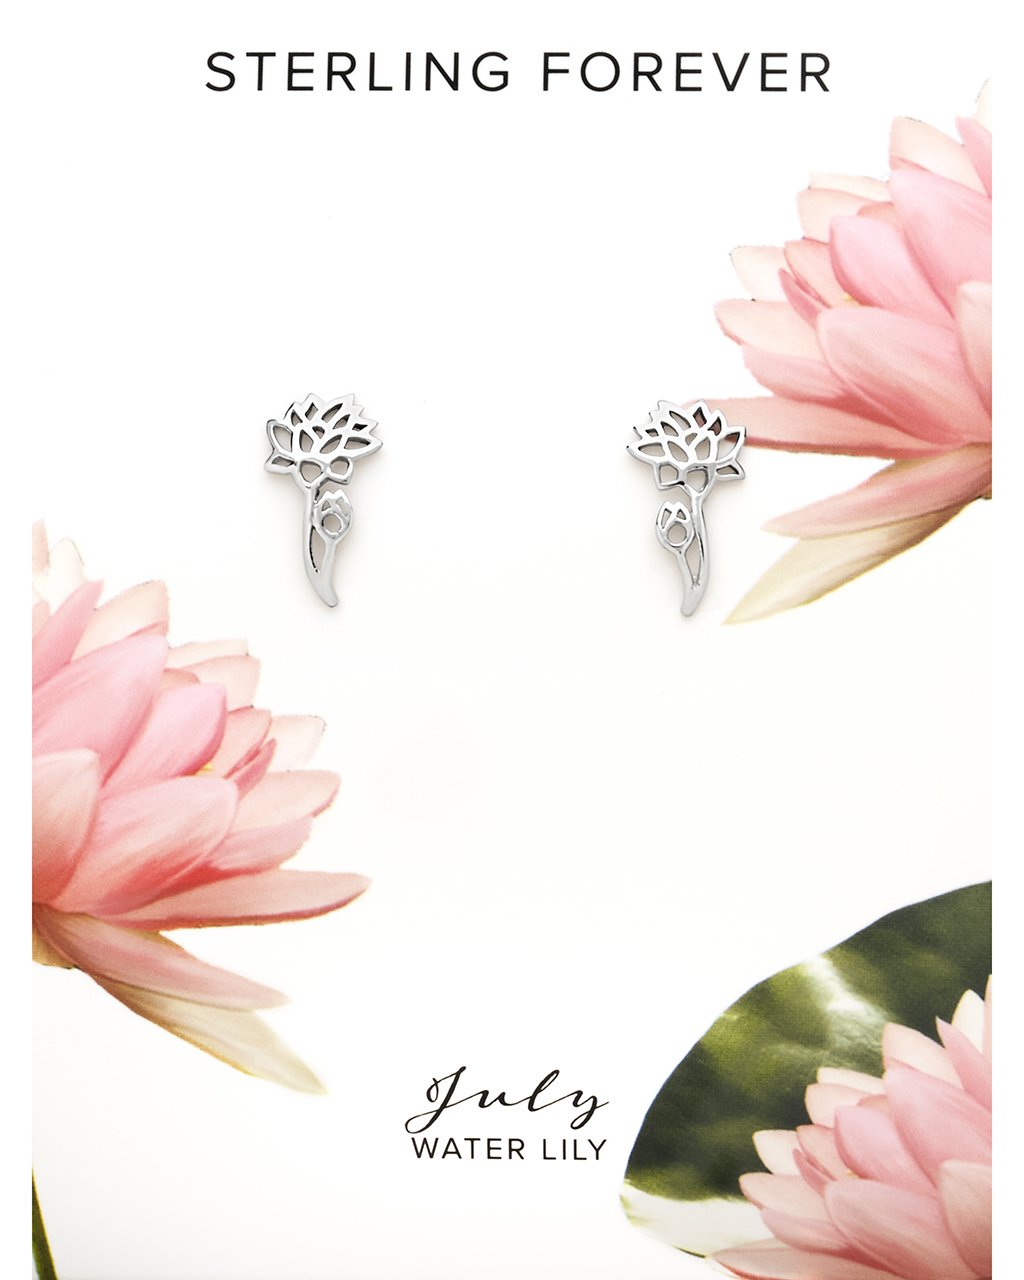 Sterling Silver Birth Flower Studs Earring Sterling Forever Silver July / Water Lily 